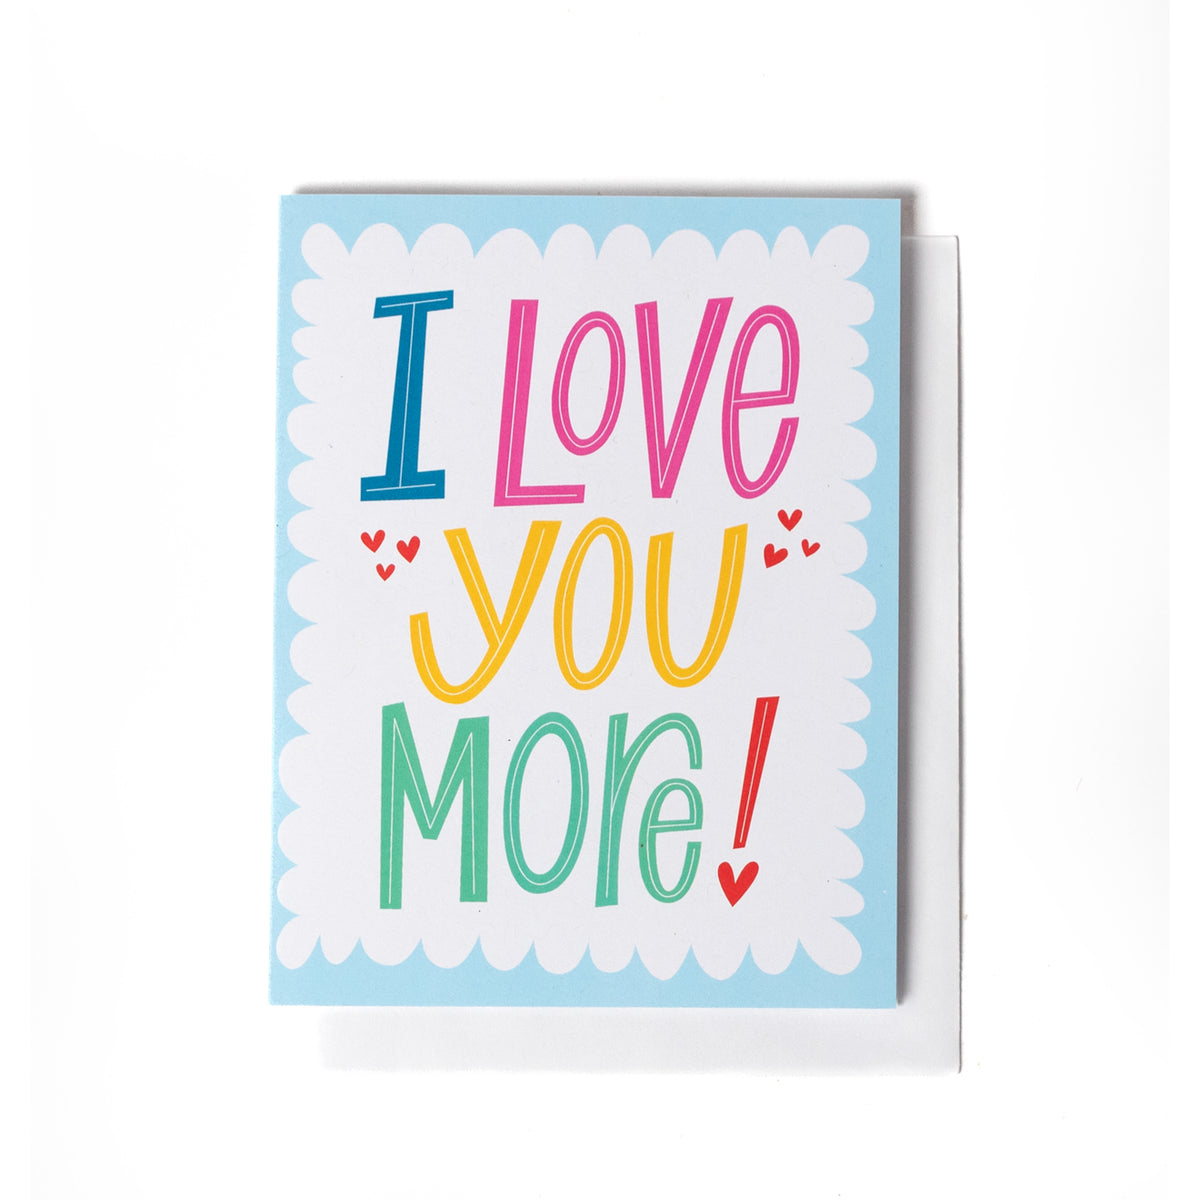 Tickled Floral sells Justine Ma cards. This card says I Love You More